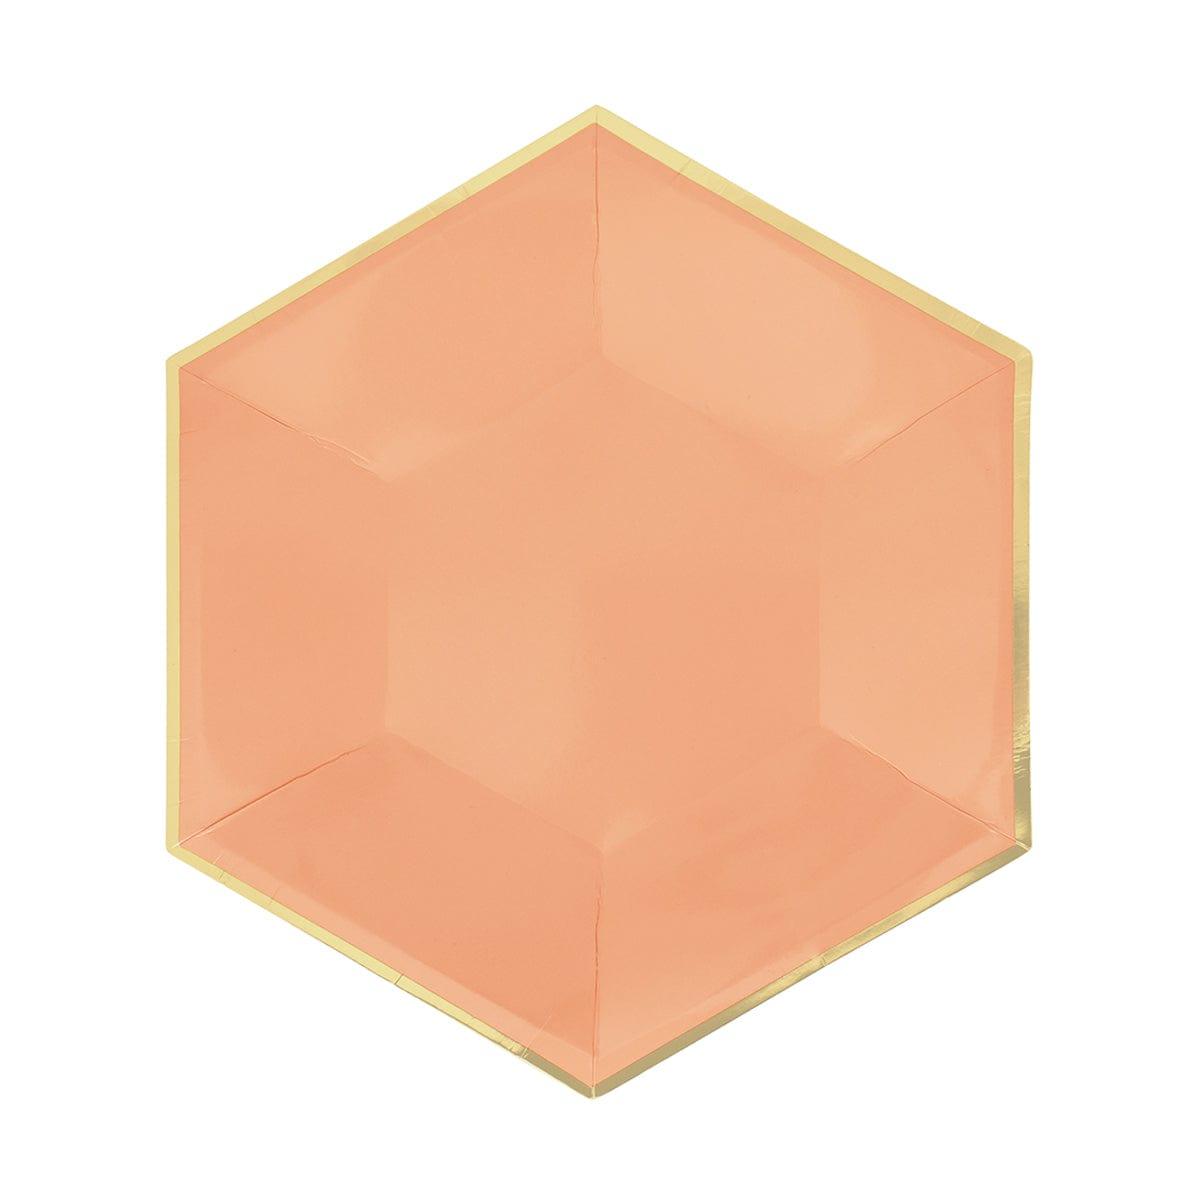 YIWU SANDY PAPER PRODUCTS CO., LTD Everyday Entertaining Hexagon Orange Plates, 7 Inches, 8 Count